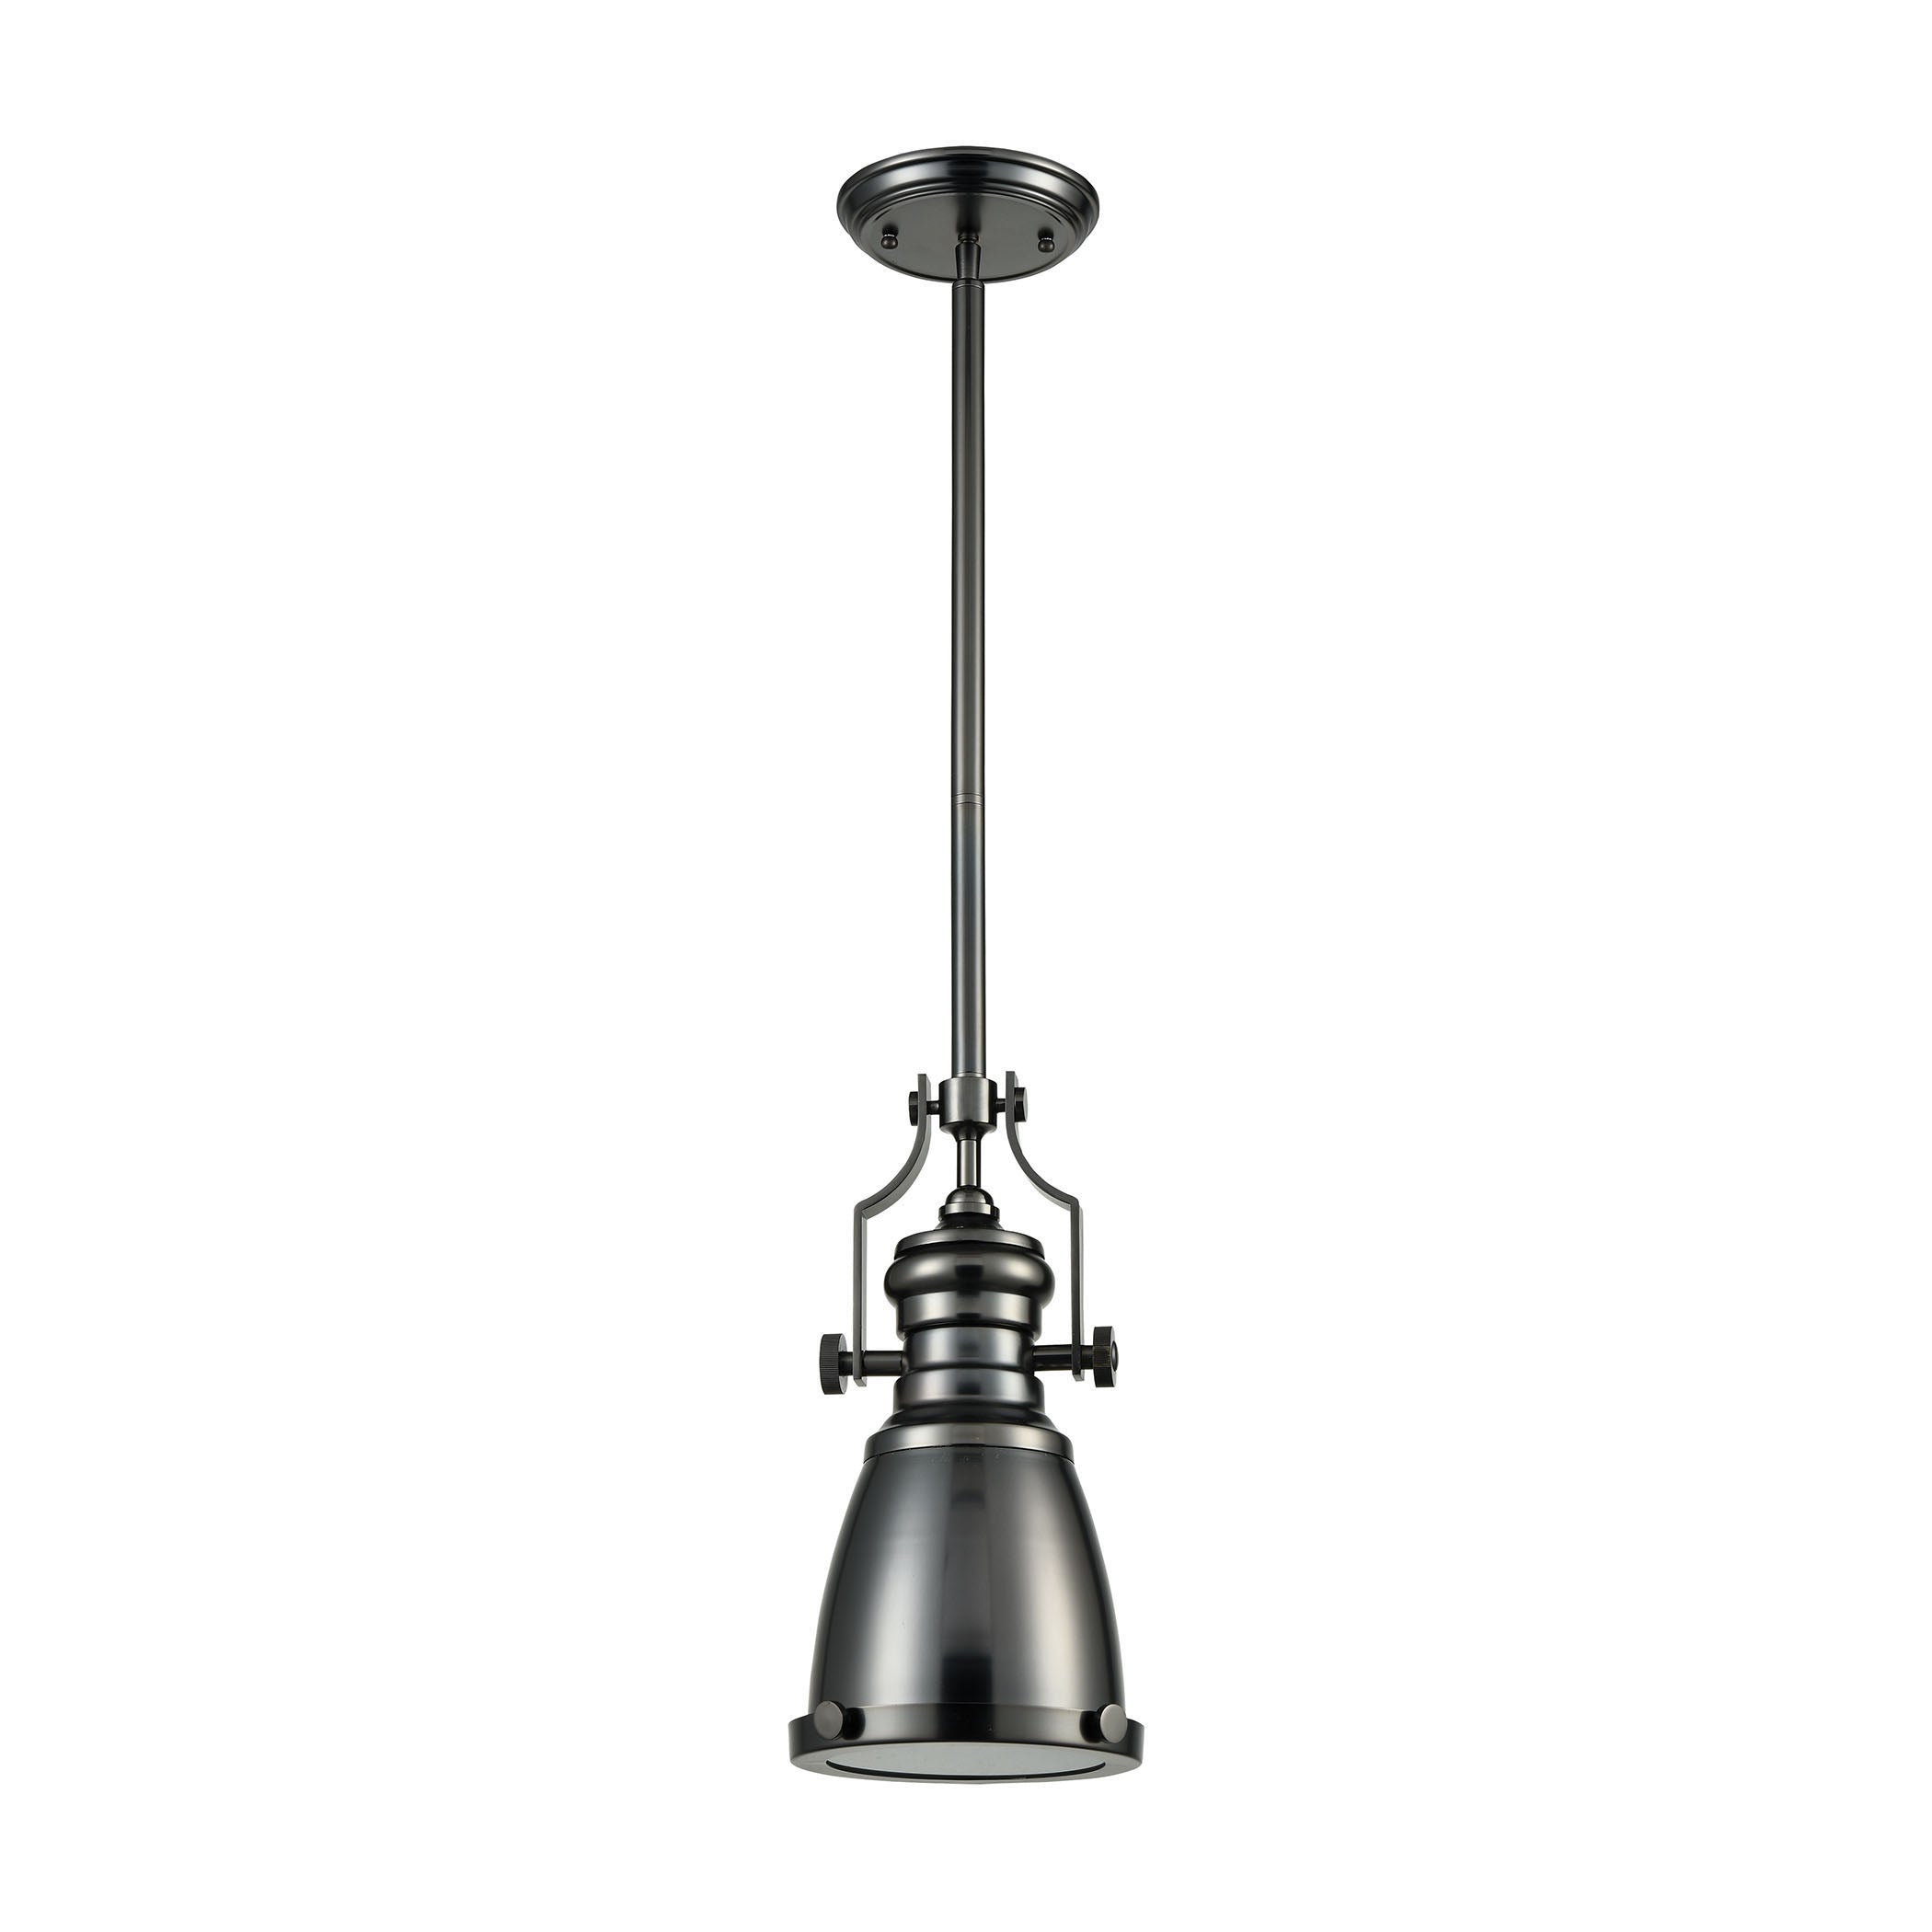 ELK Lighting 66609-1 Chadwick 1-Light Mini Pendant in Black Nickel with Metal Shade and Frosted Glass Diffuser